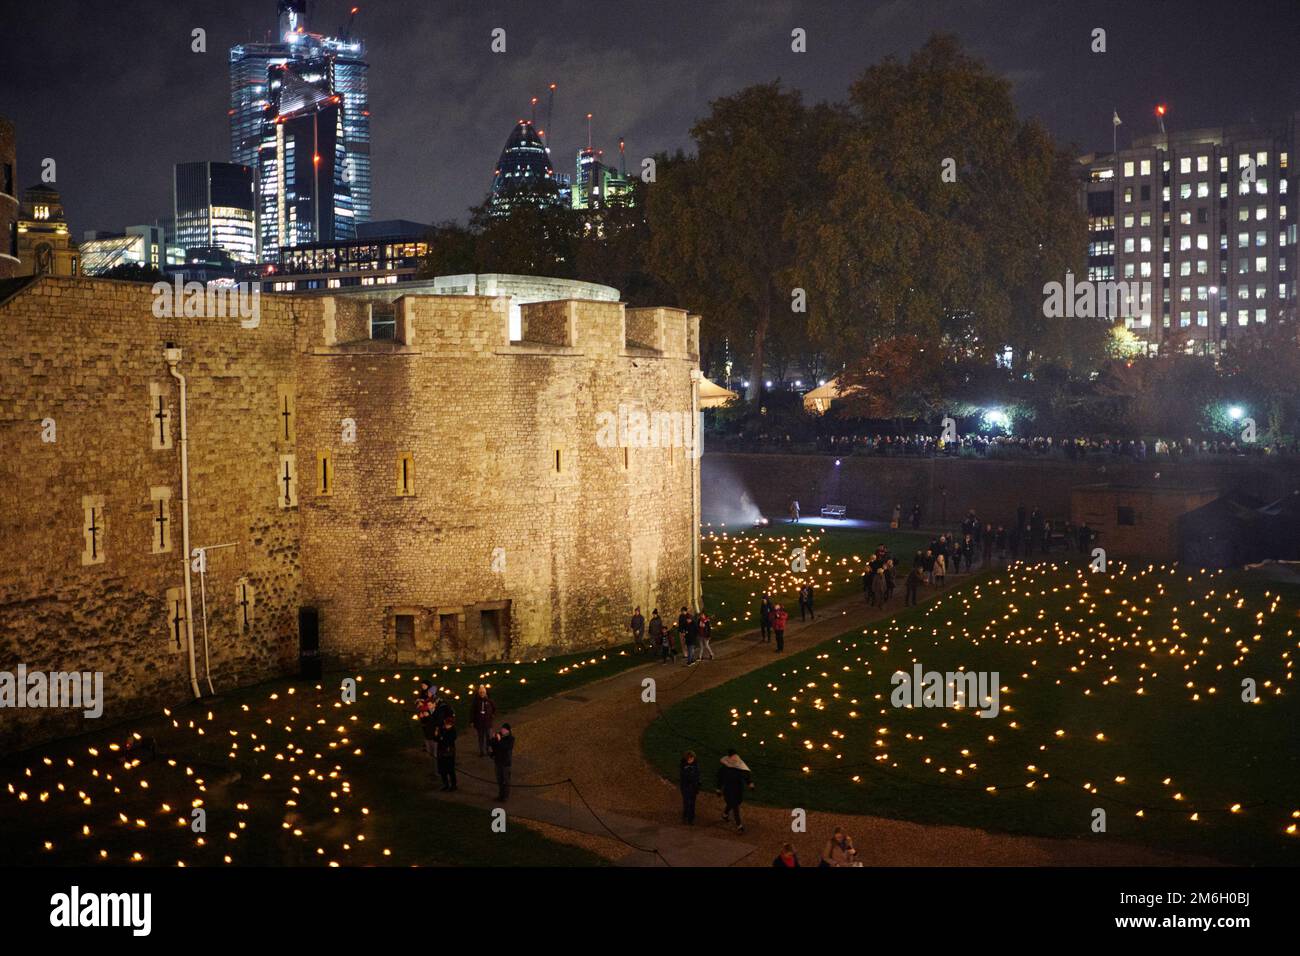 Lights are displayed in the grounds of the Tower of London to mark Remembrance Day in London Stock Photo